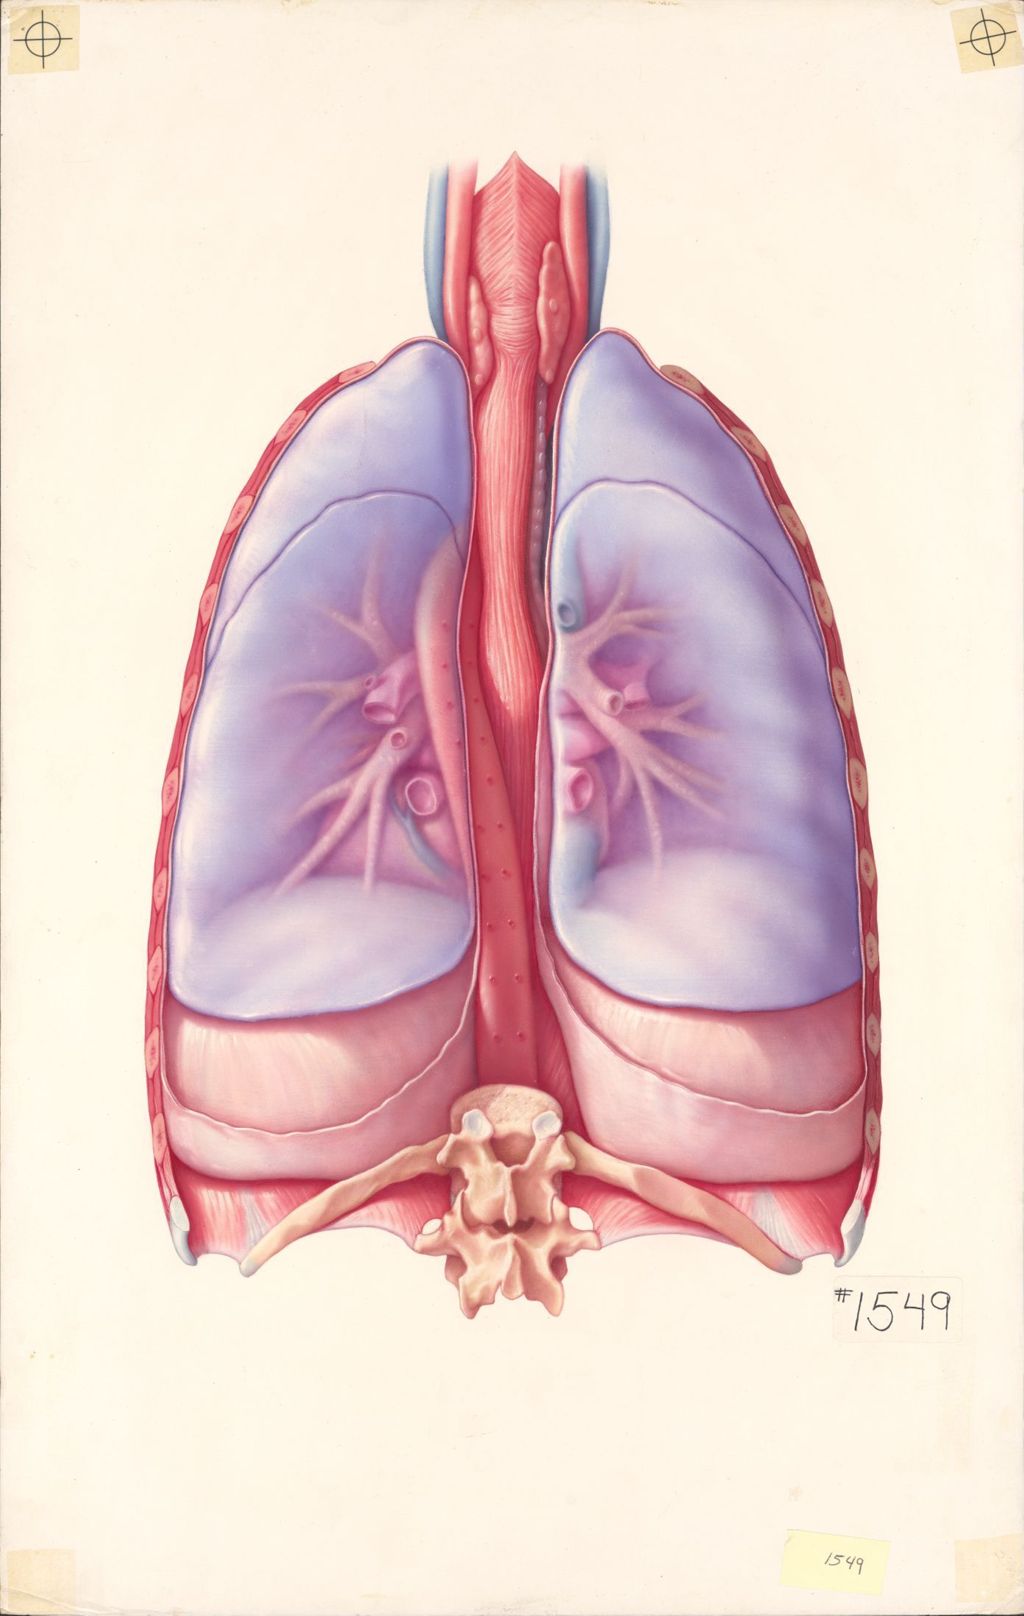 Miniature of Medical Profiles, The Anatomical Disposition of the Thorax, Plate II, Dorsal Aspect of the Structures of the Thoracic Cavity